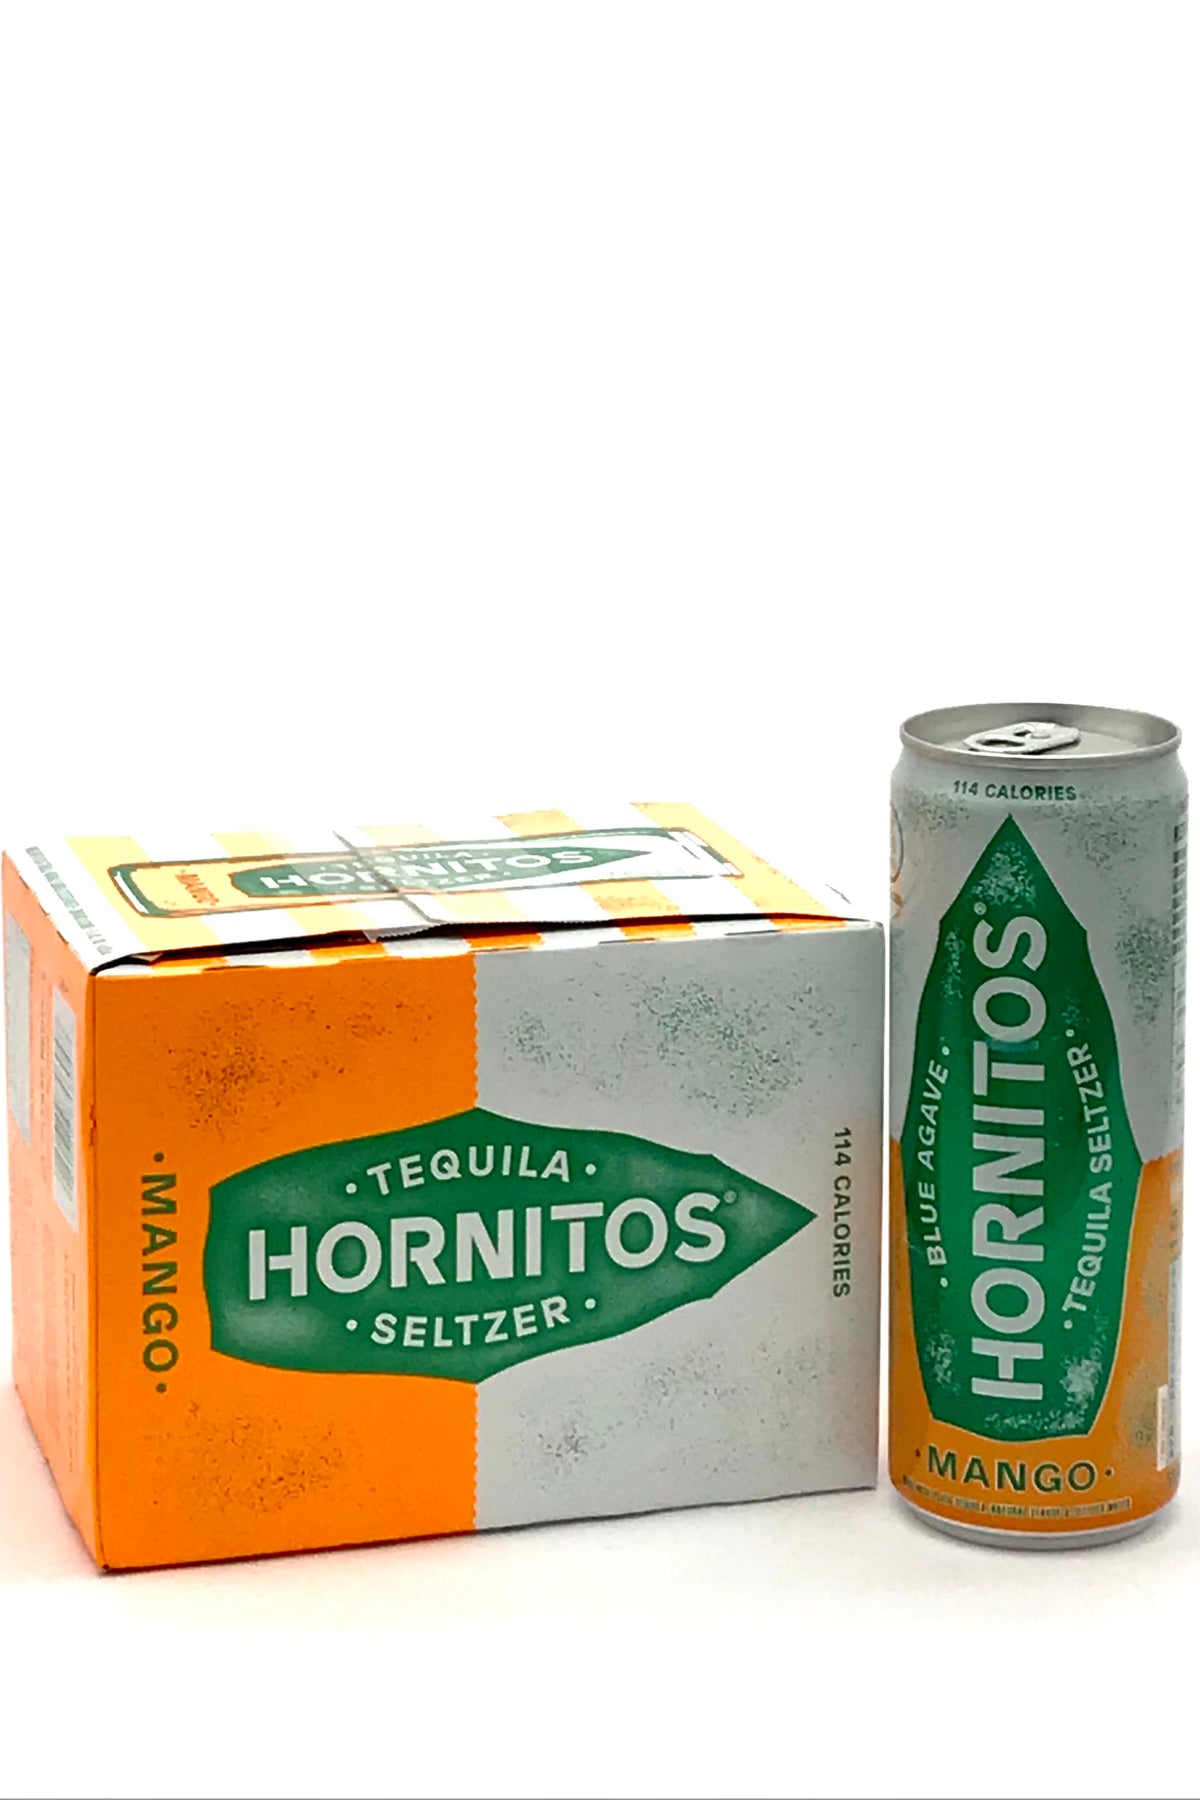 Hornitos Tequila Seltzer Mango RTD Cocktail 4 x 355 ml cans